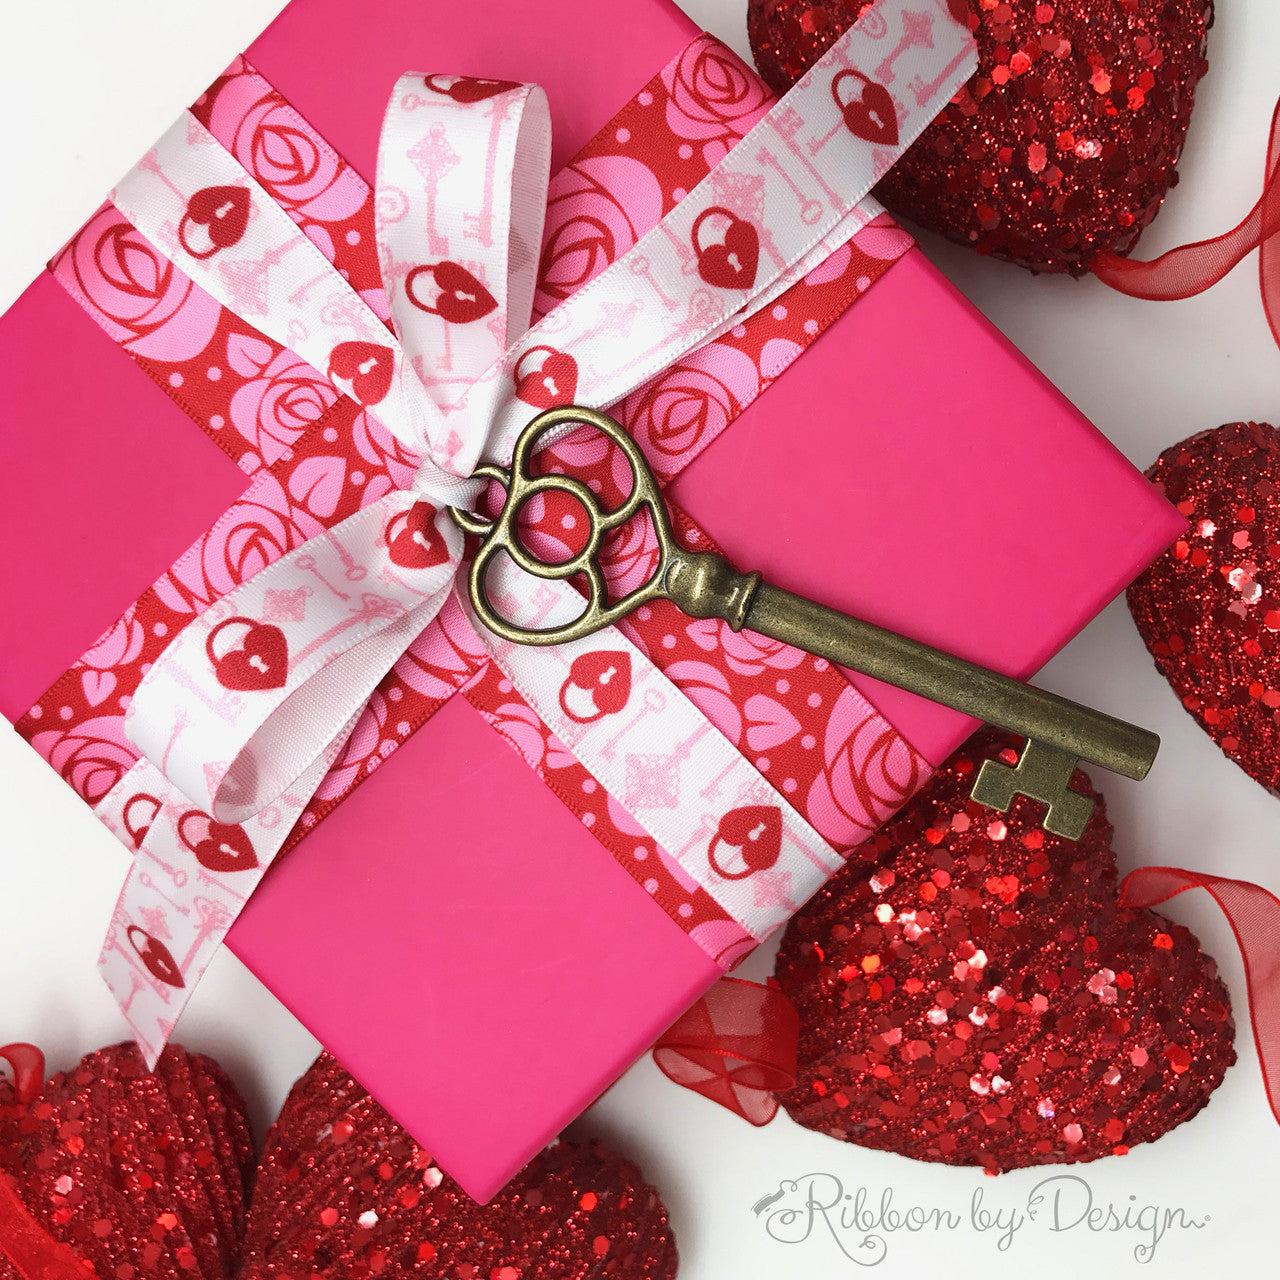 The prettiest bow on a little package can send the best message! I'm giving you the key to my heart!